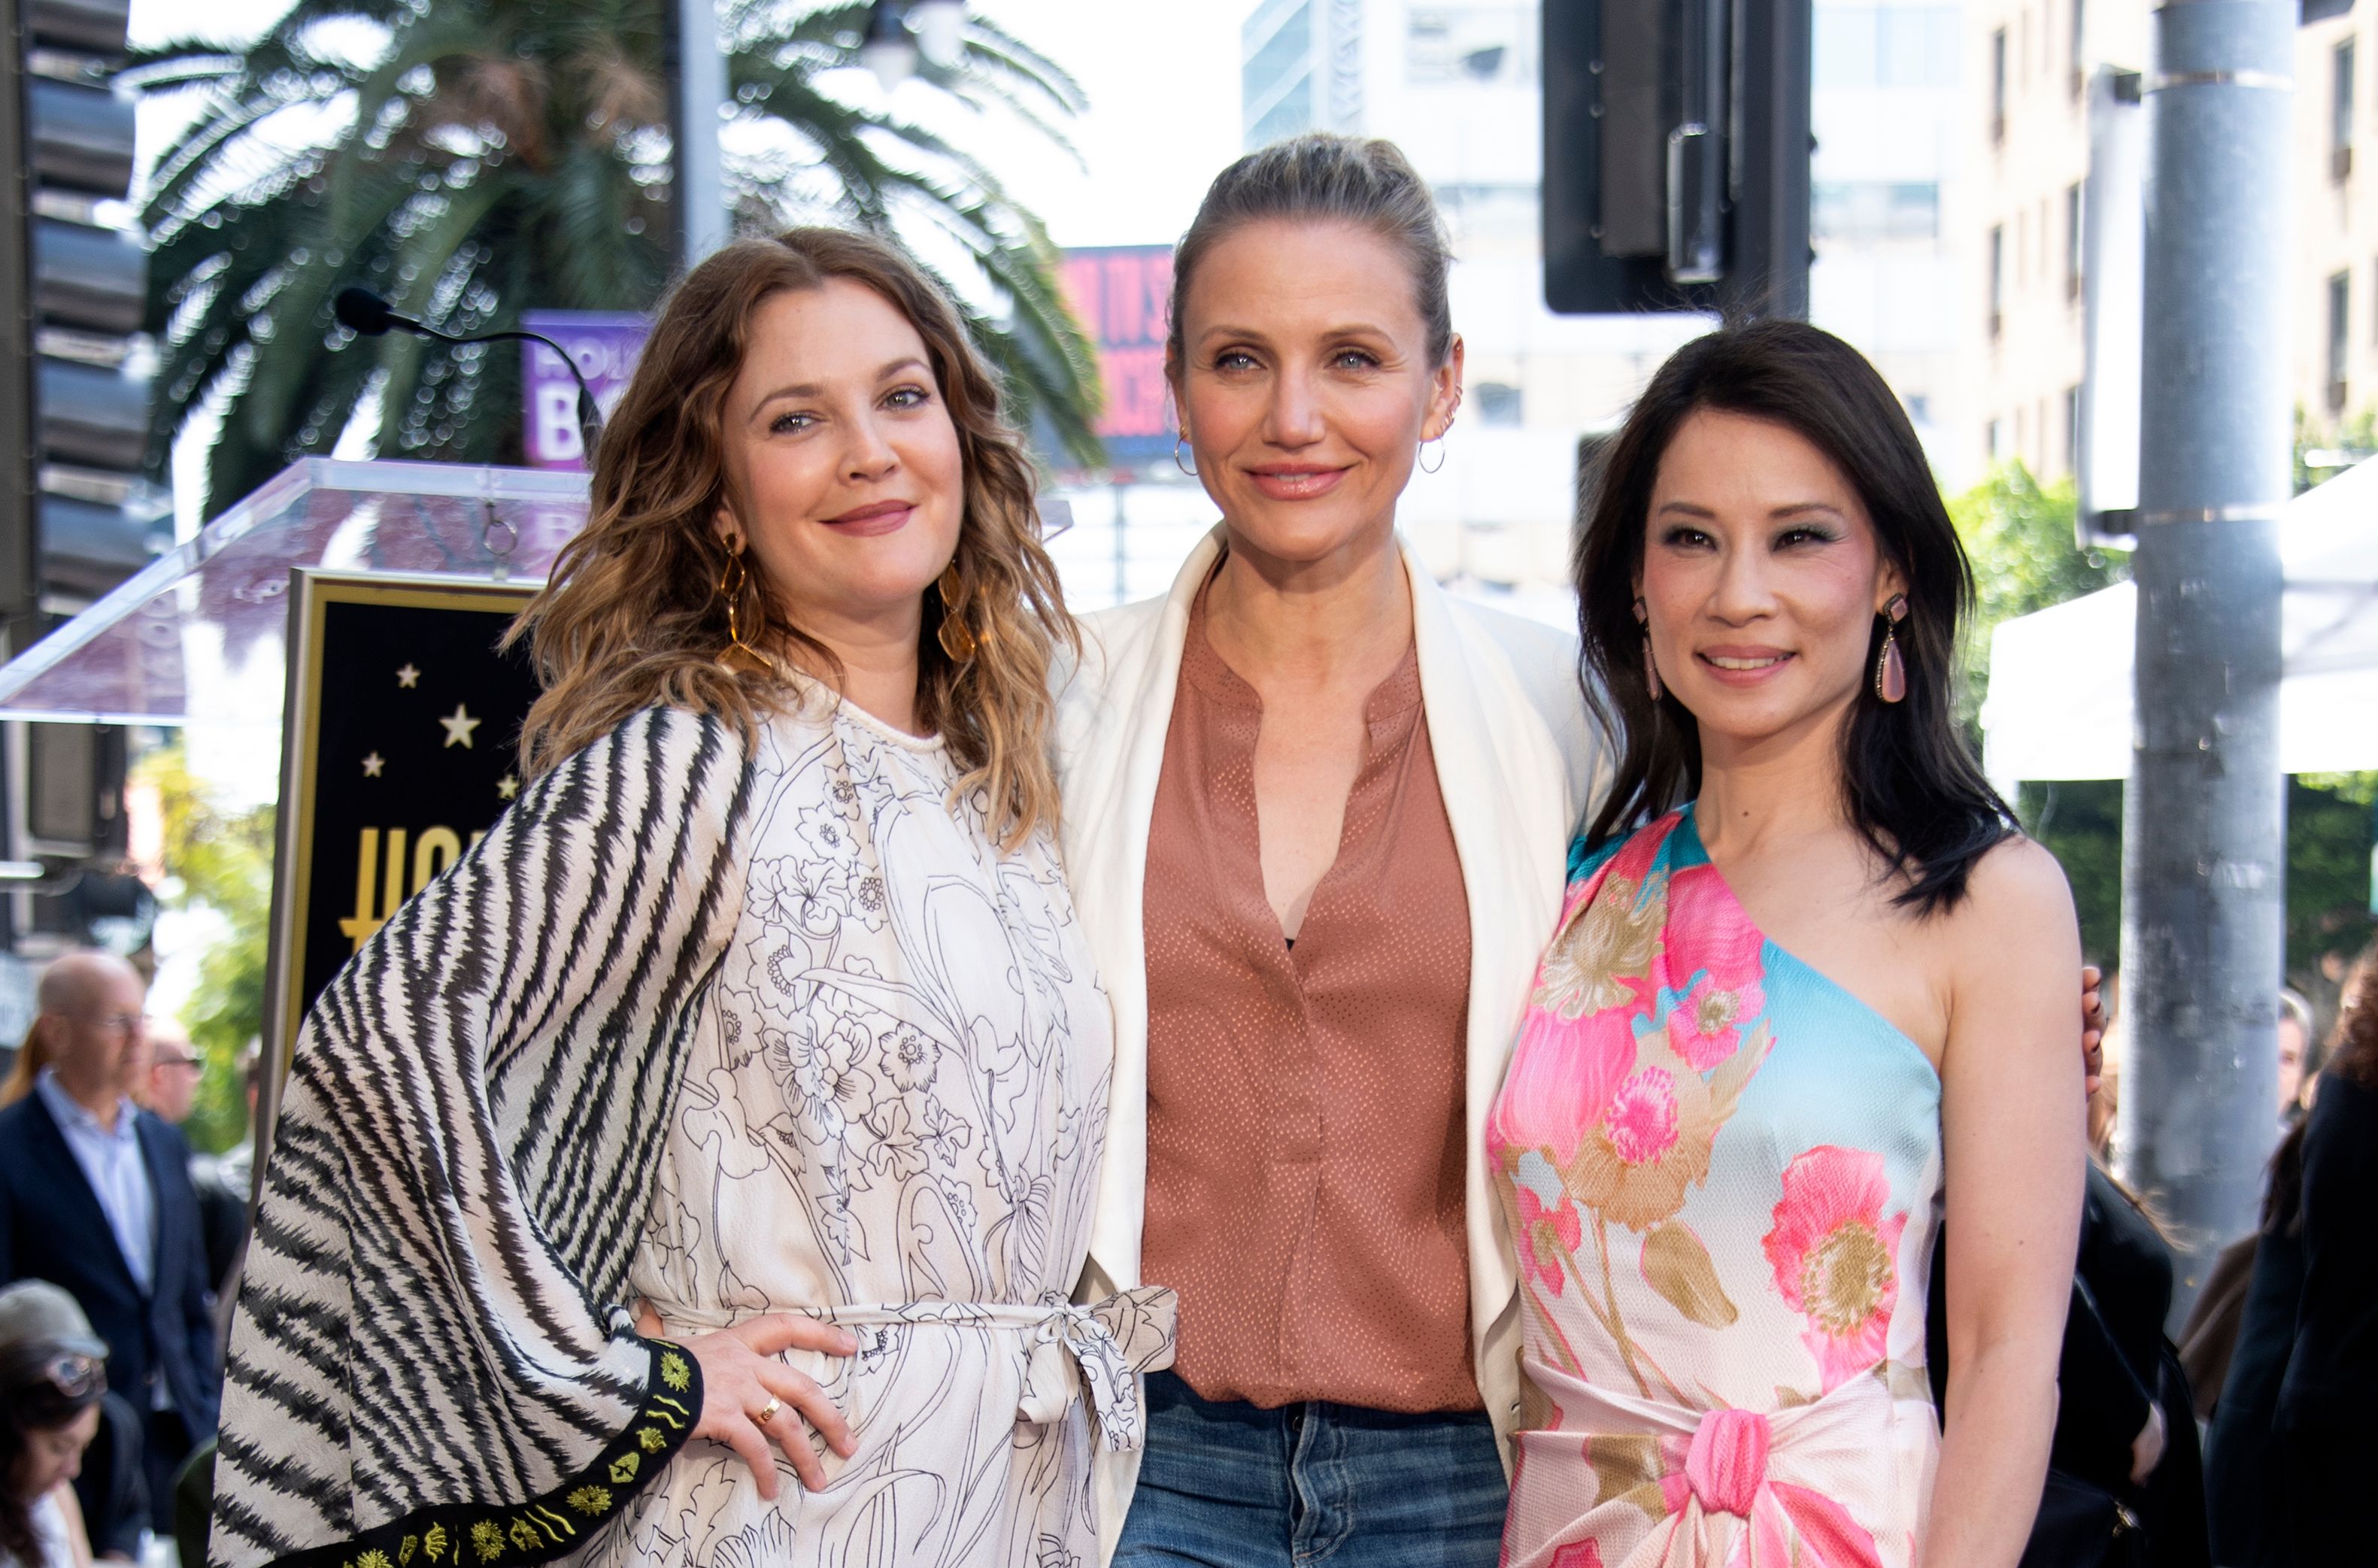 Drew Barrymore (L), Cameron Diaz (C) and Lucy Liu (R) stand on the star during Liu's Walk of Fame ceremony in Hollywood on May 1, 2019.